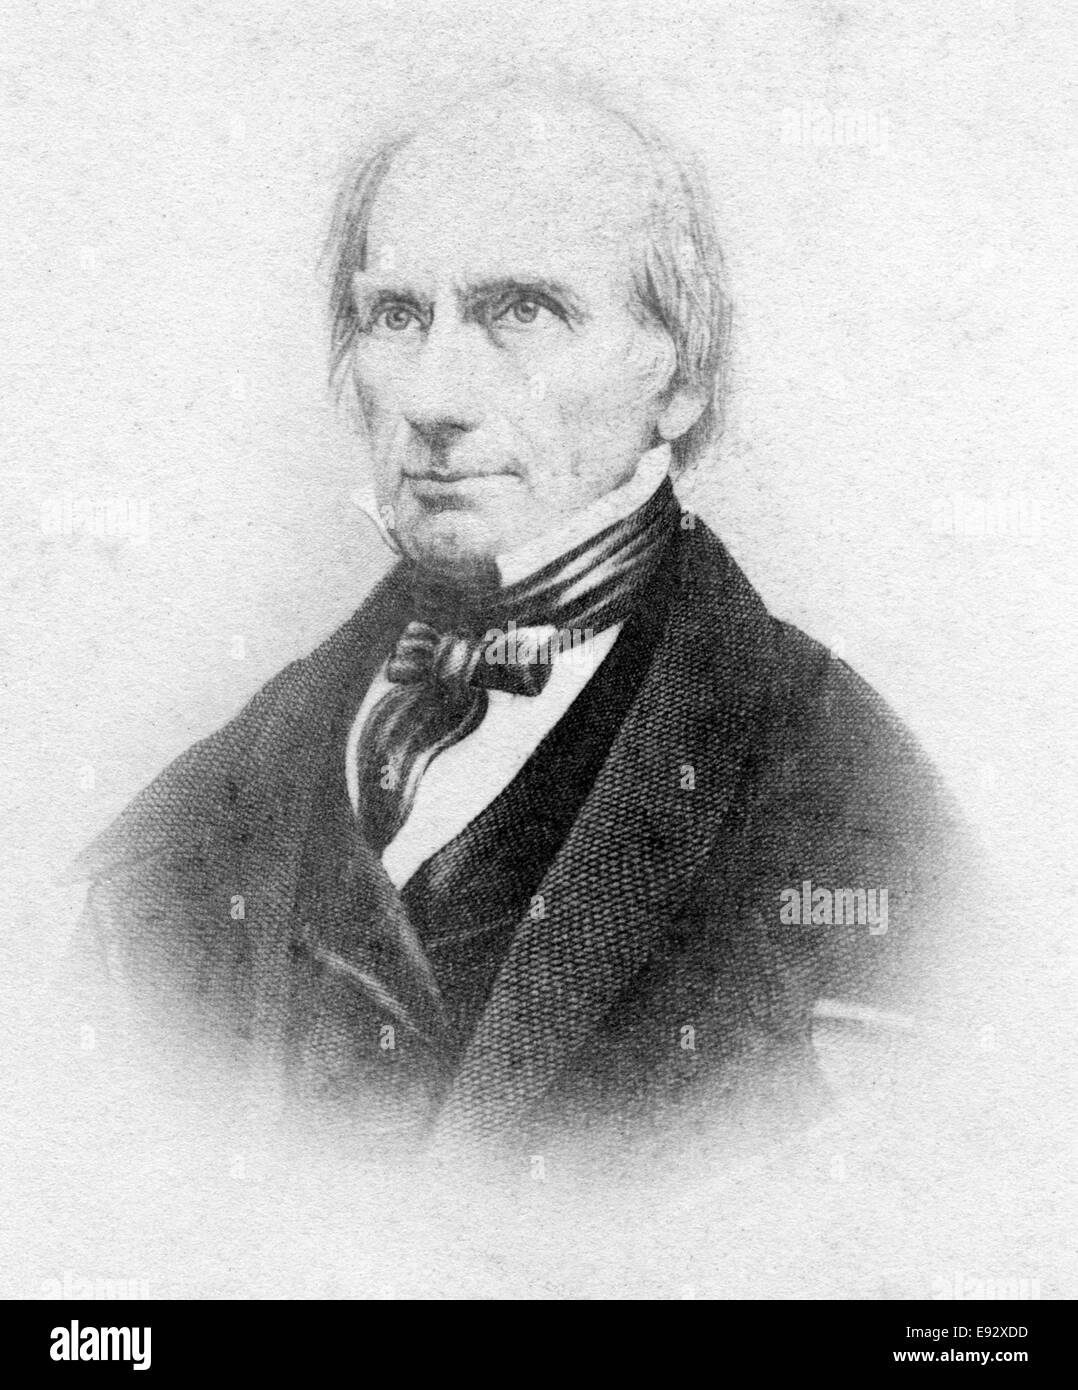 Henry Clay (1777-1852), American Lawyer, Politician, and Skilled Orator, Portrait, circa 1850 Stock Photo